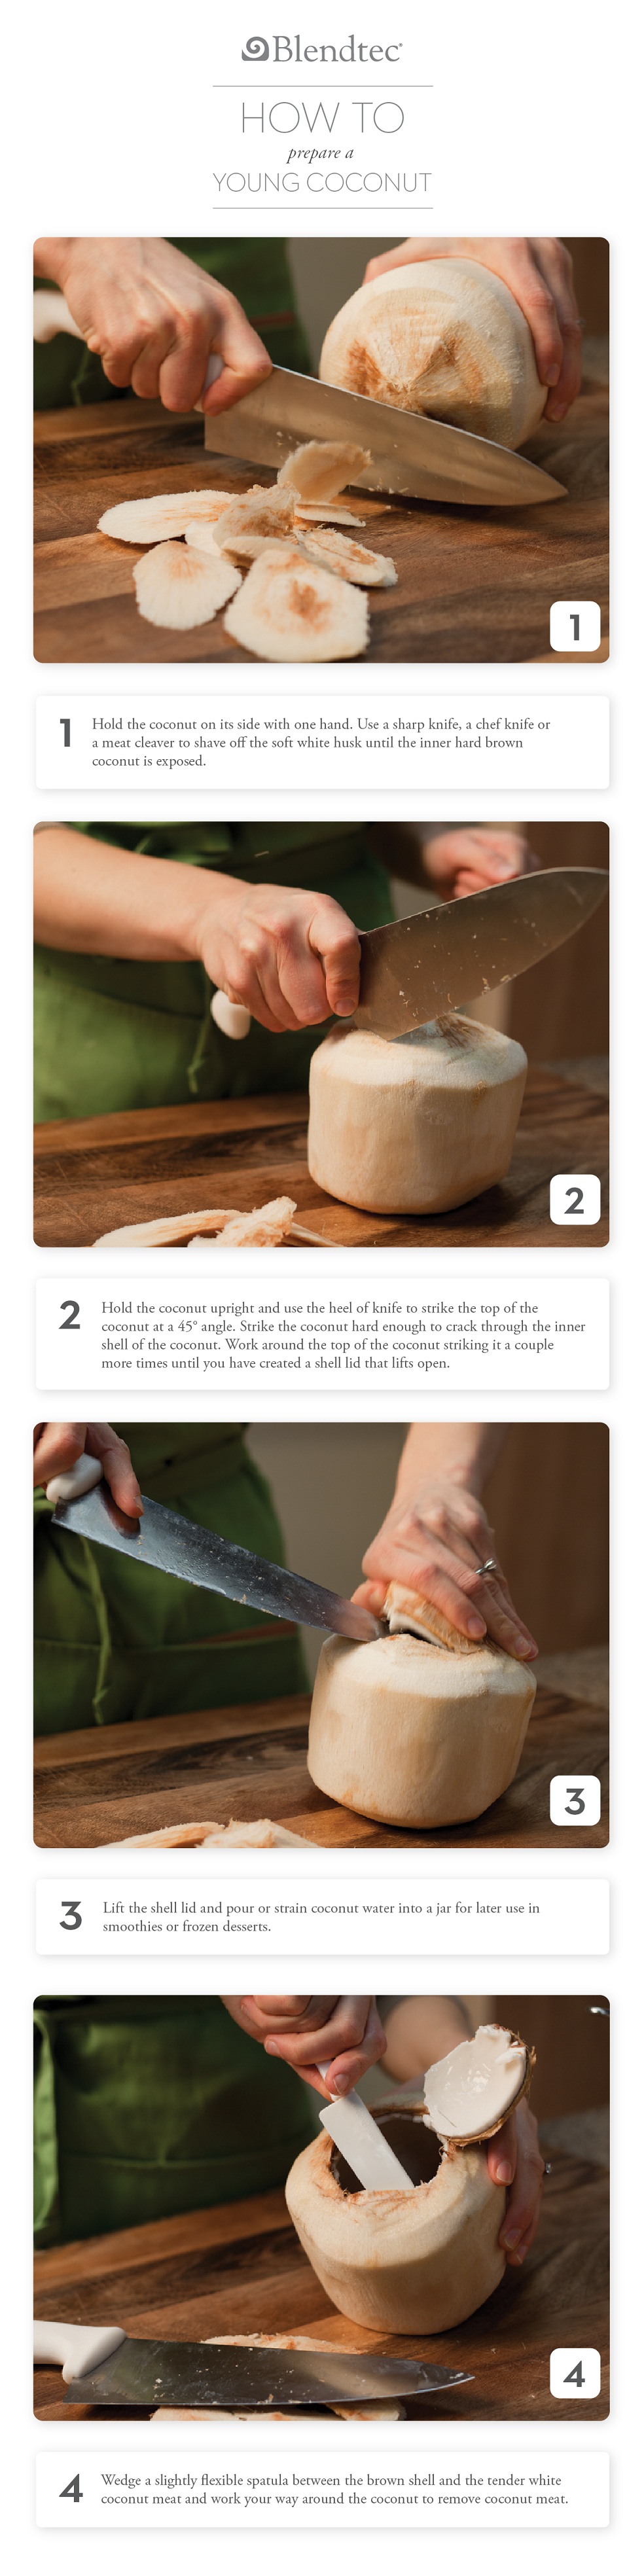 How to Prepare a Coconut